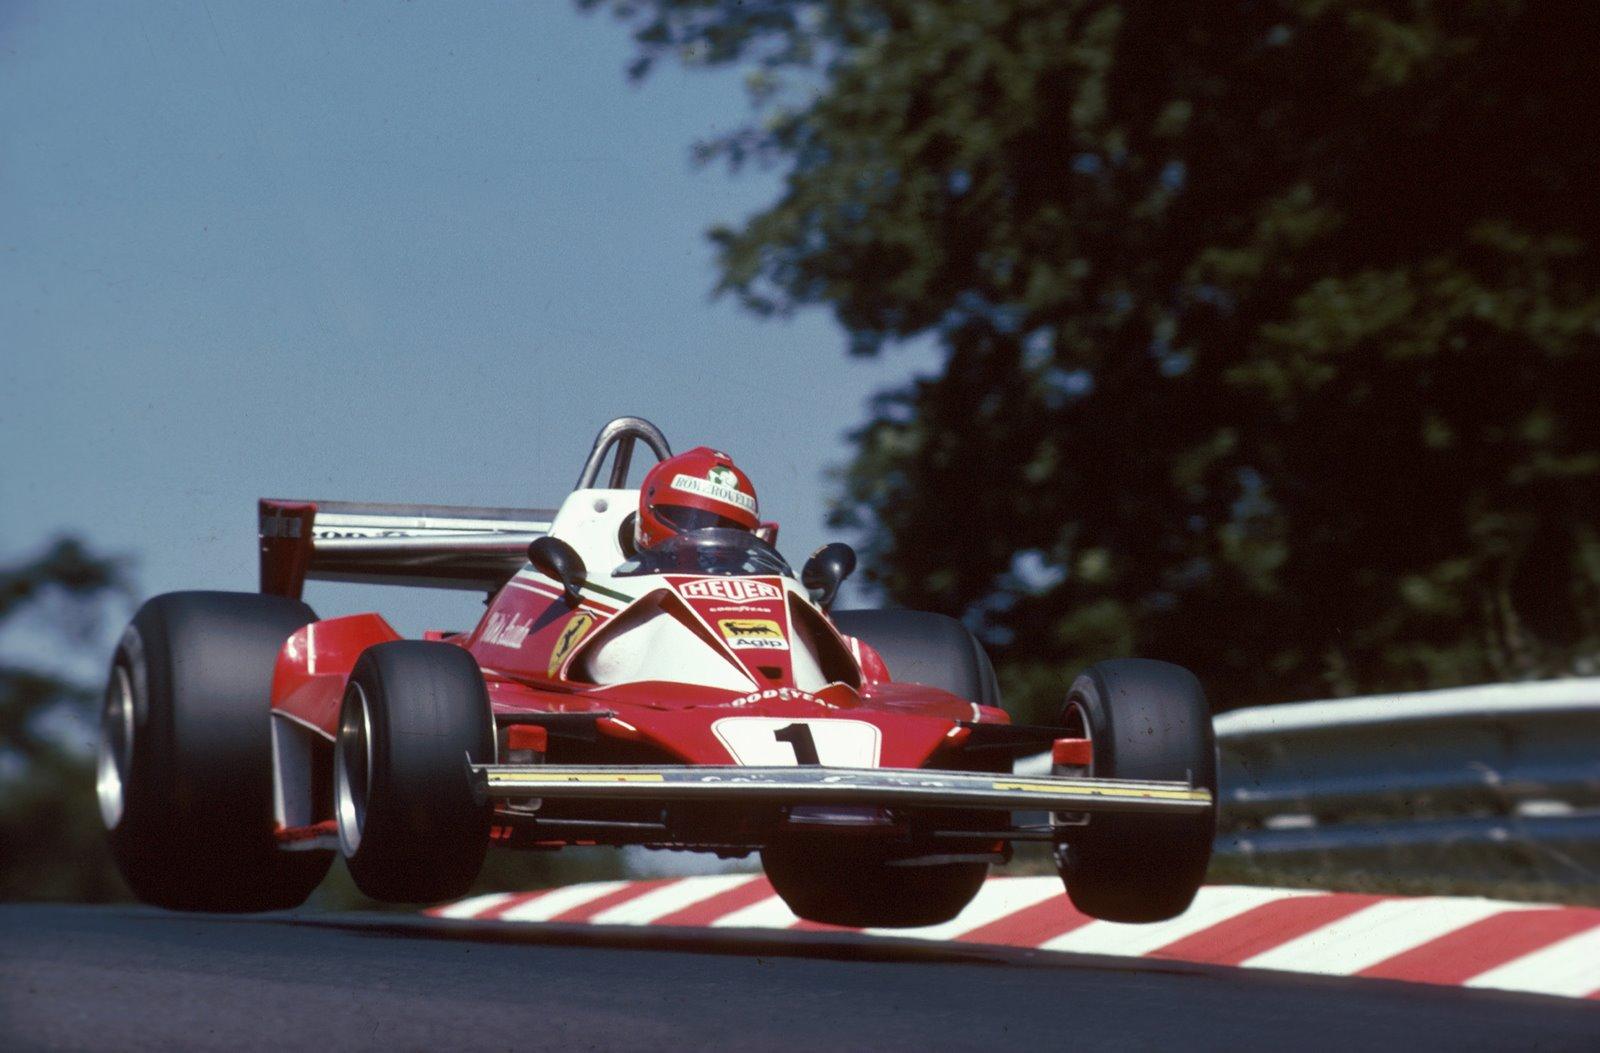 Happy Birthday to a F1 Legend, Niki Lauda, who is turning 69 today. 